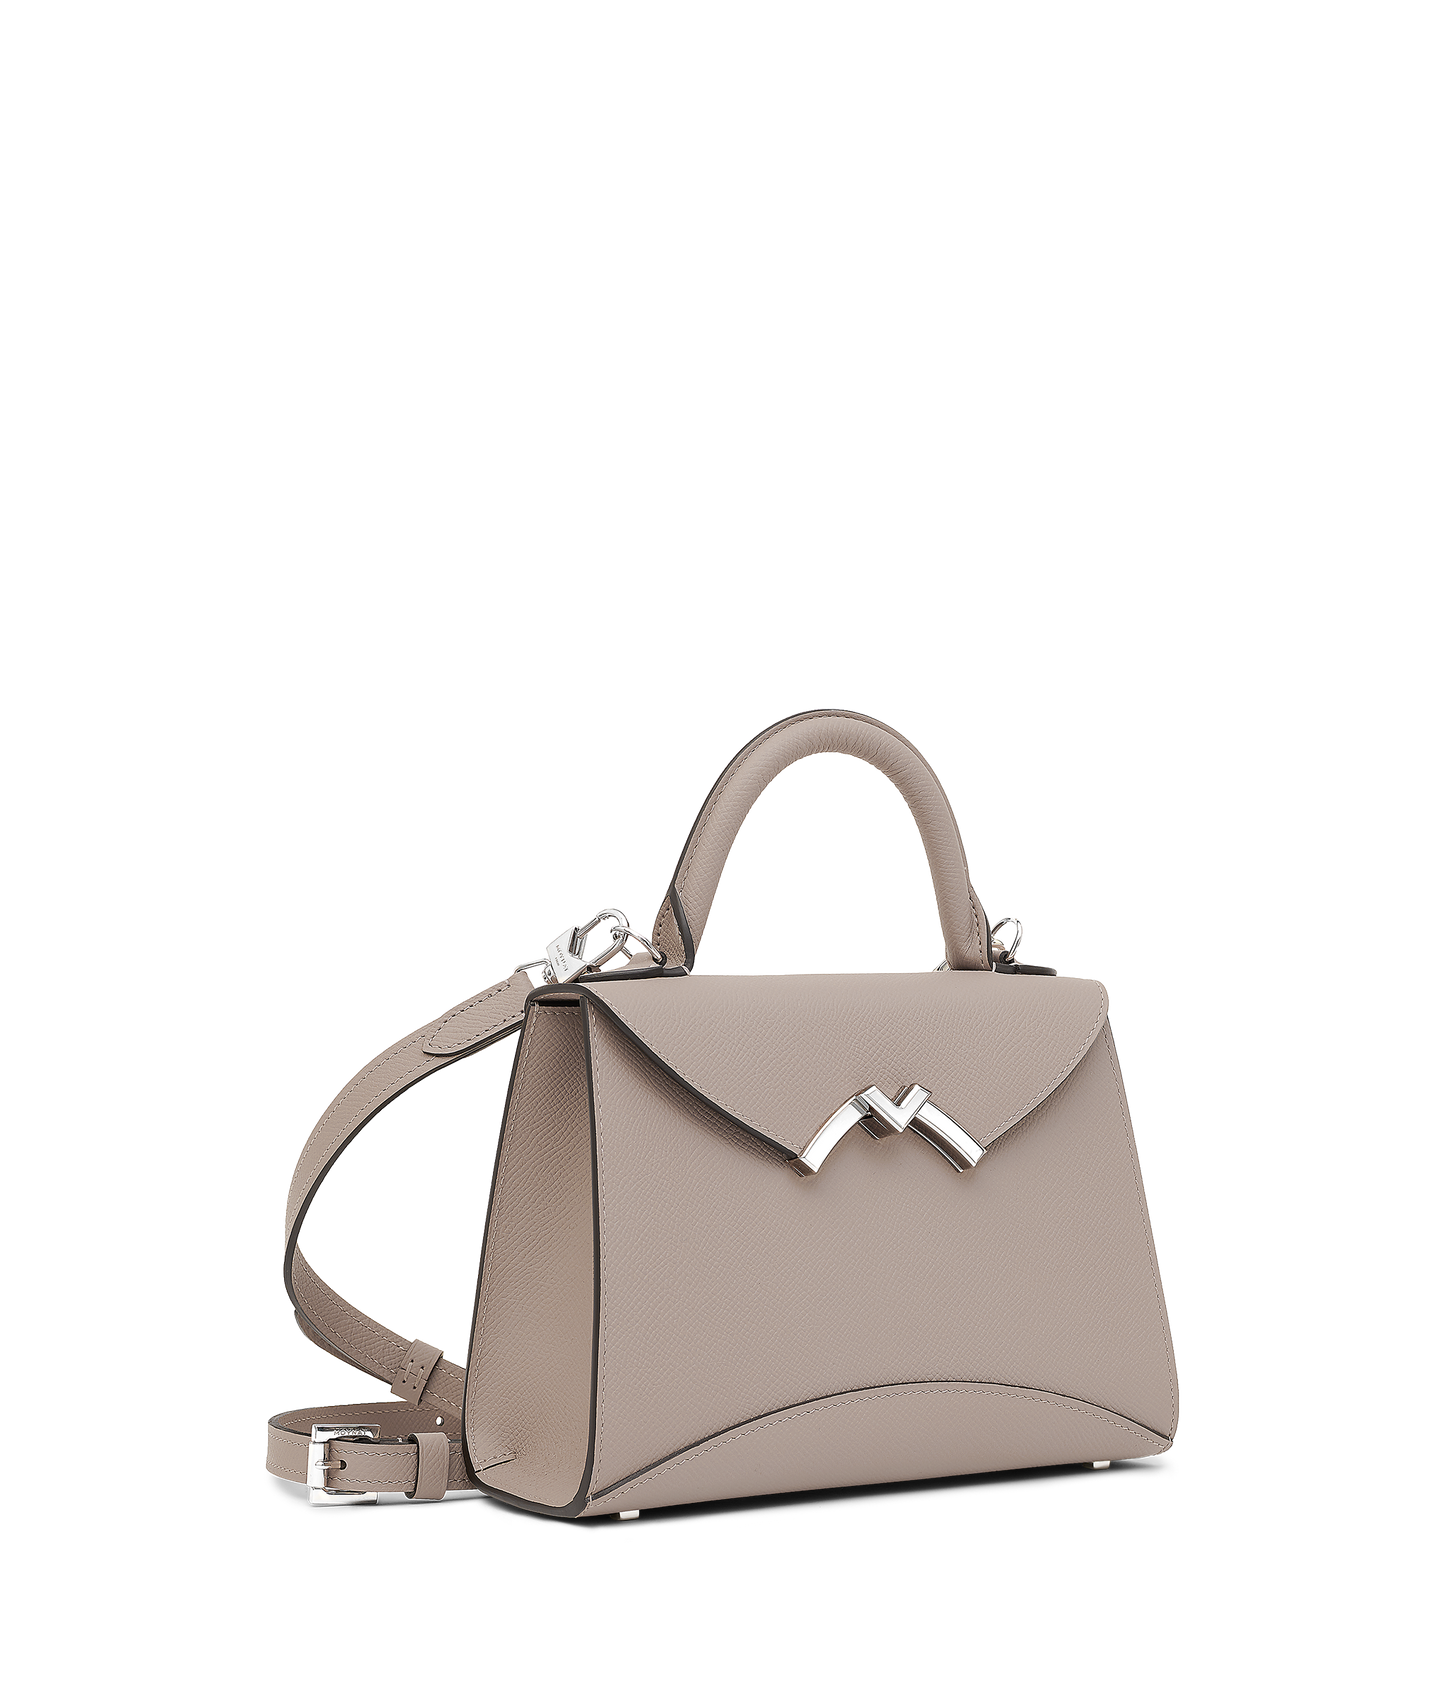 Moynat Powder Pink Poudre Gabrielle BB Silver Hardware Available